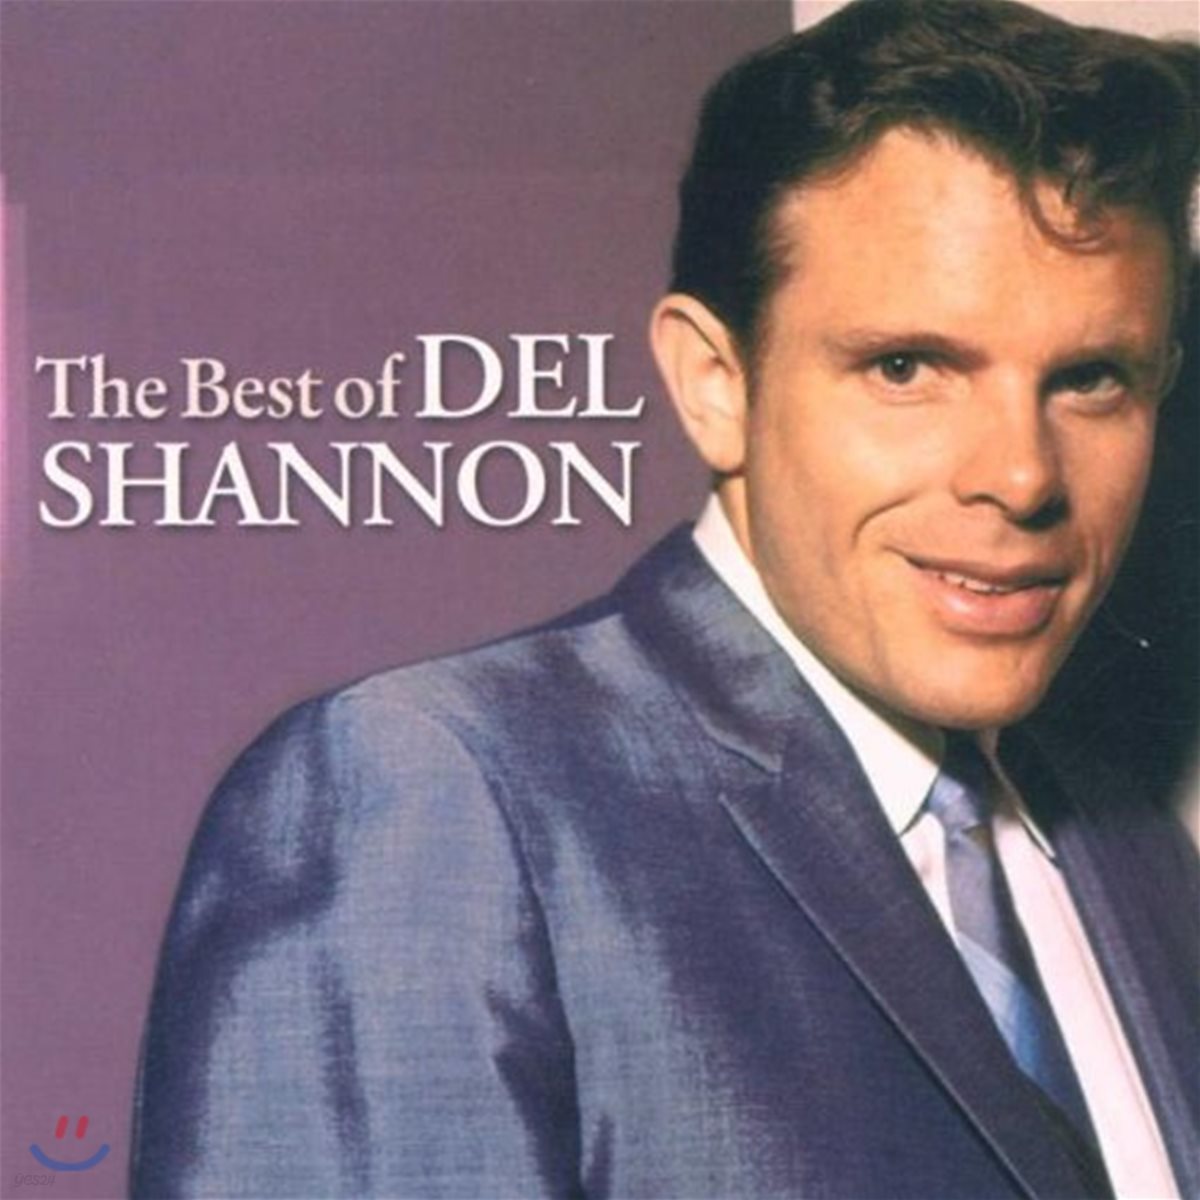 Del Shannon - Best of